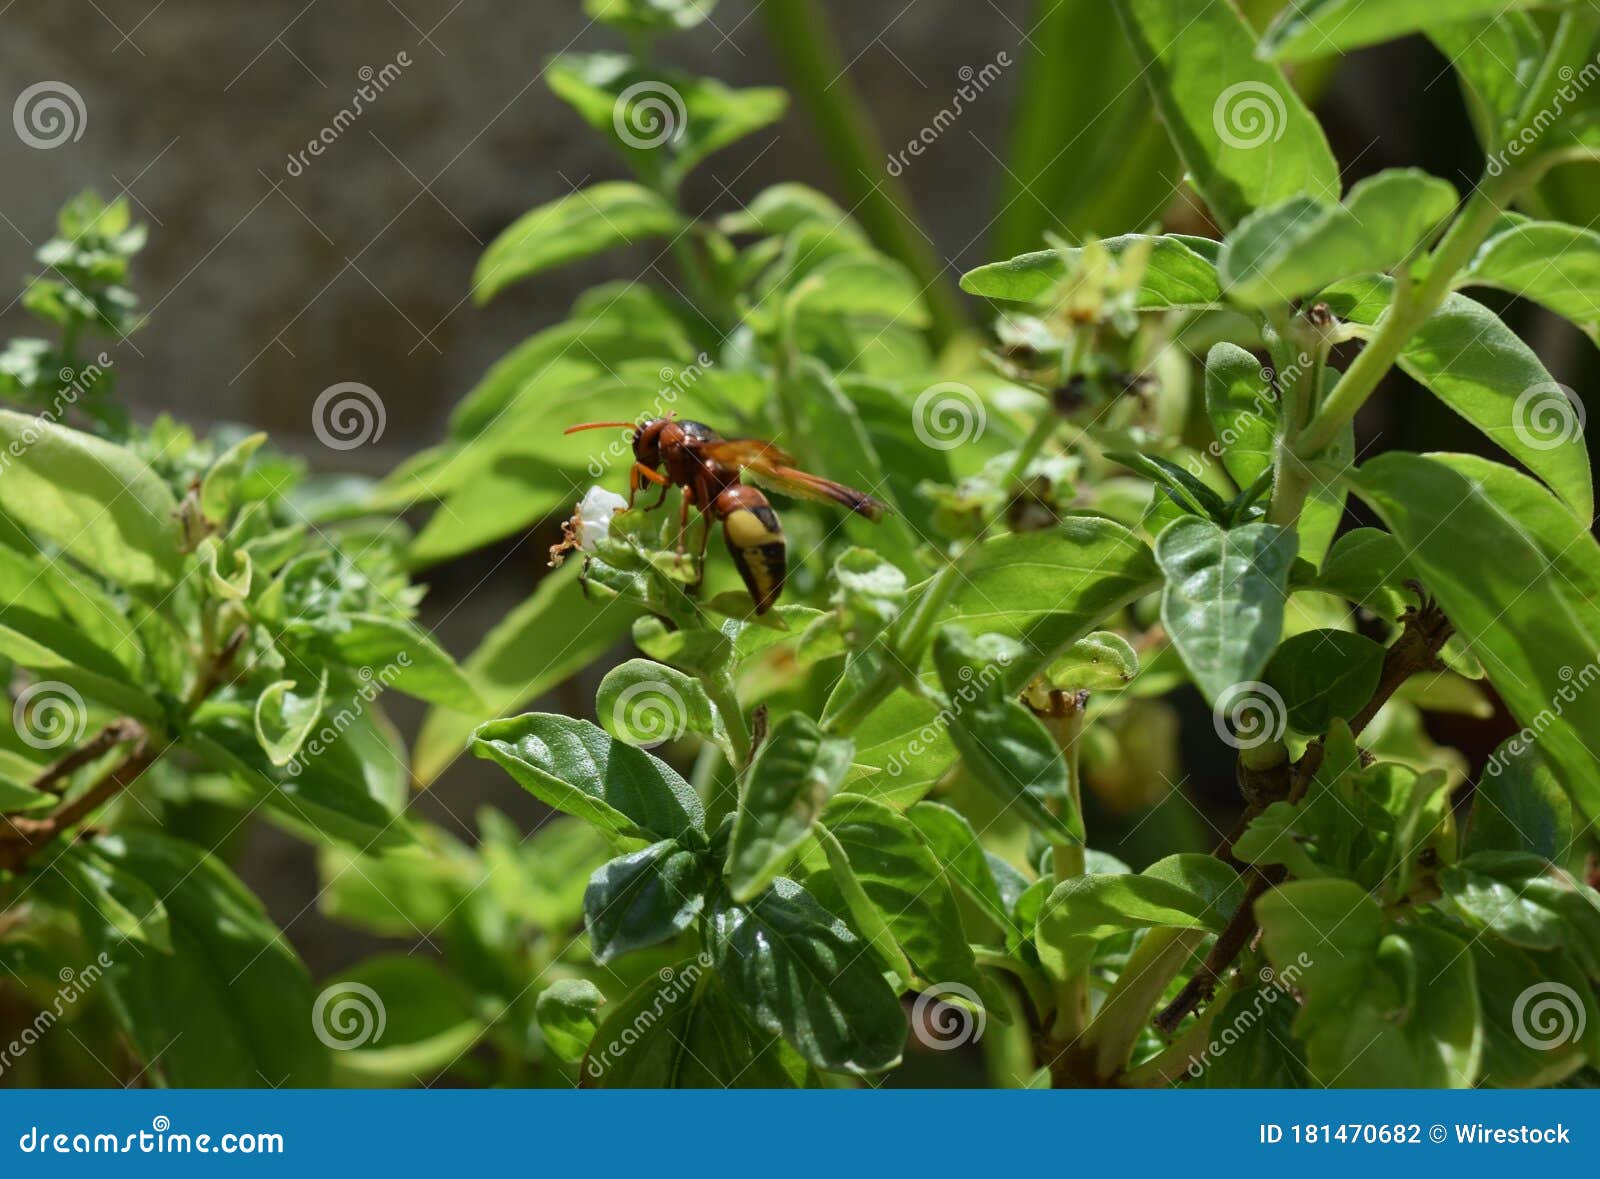 oriental hornet wasp searching for food on the leaves of the plant